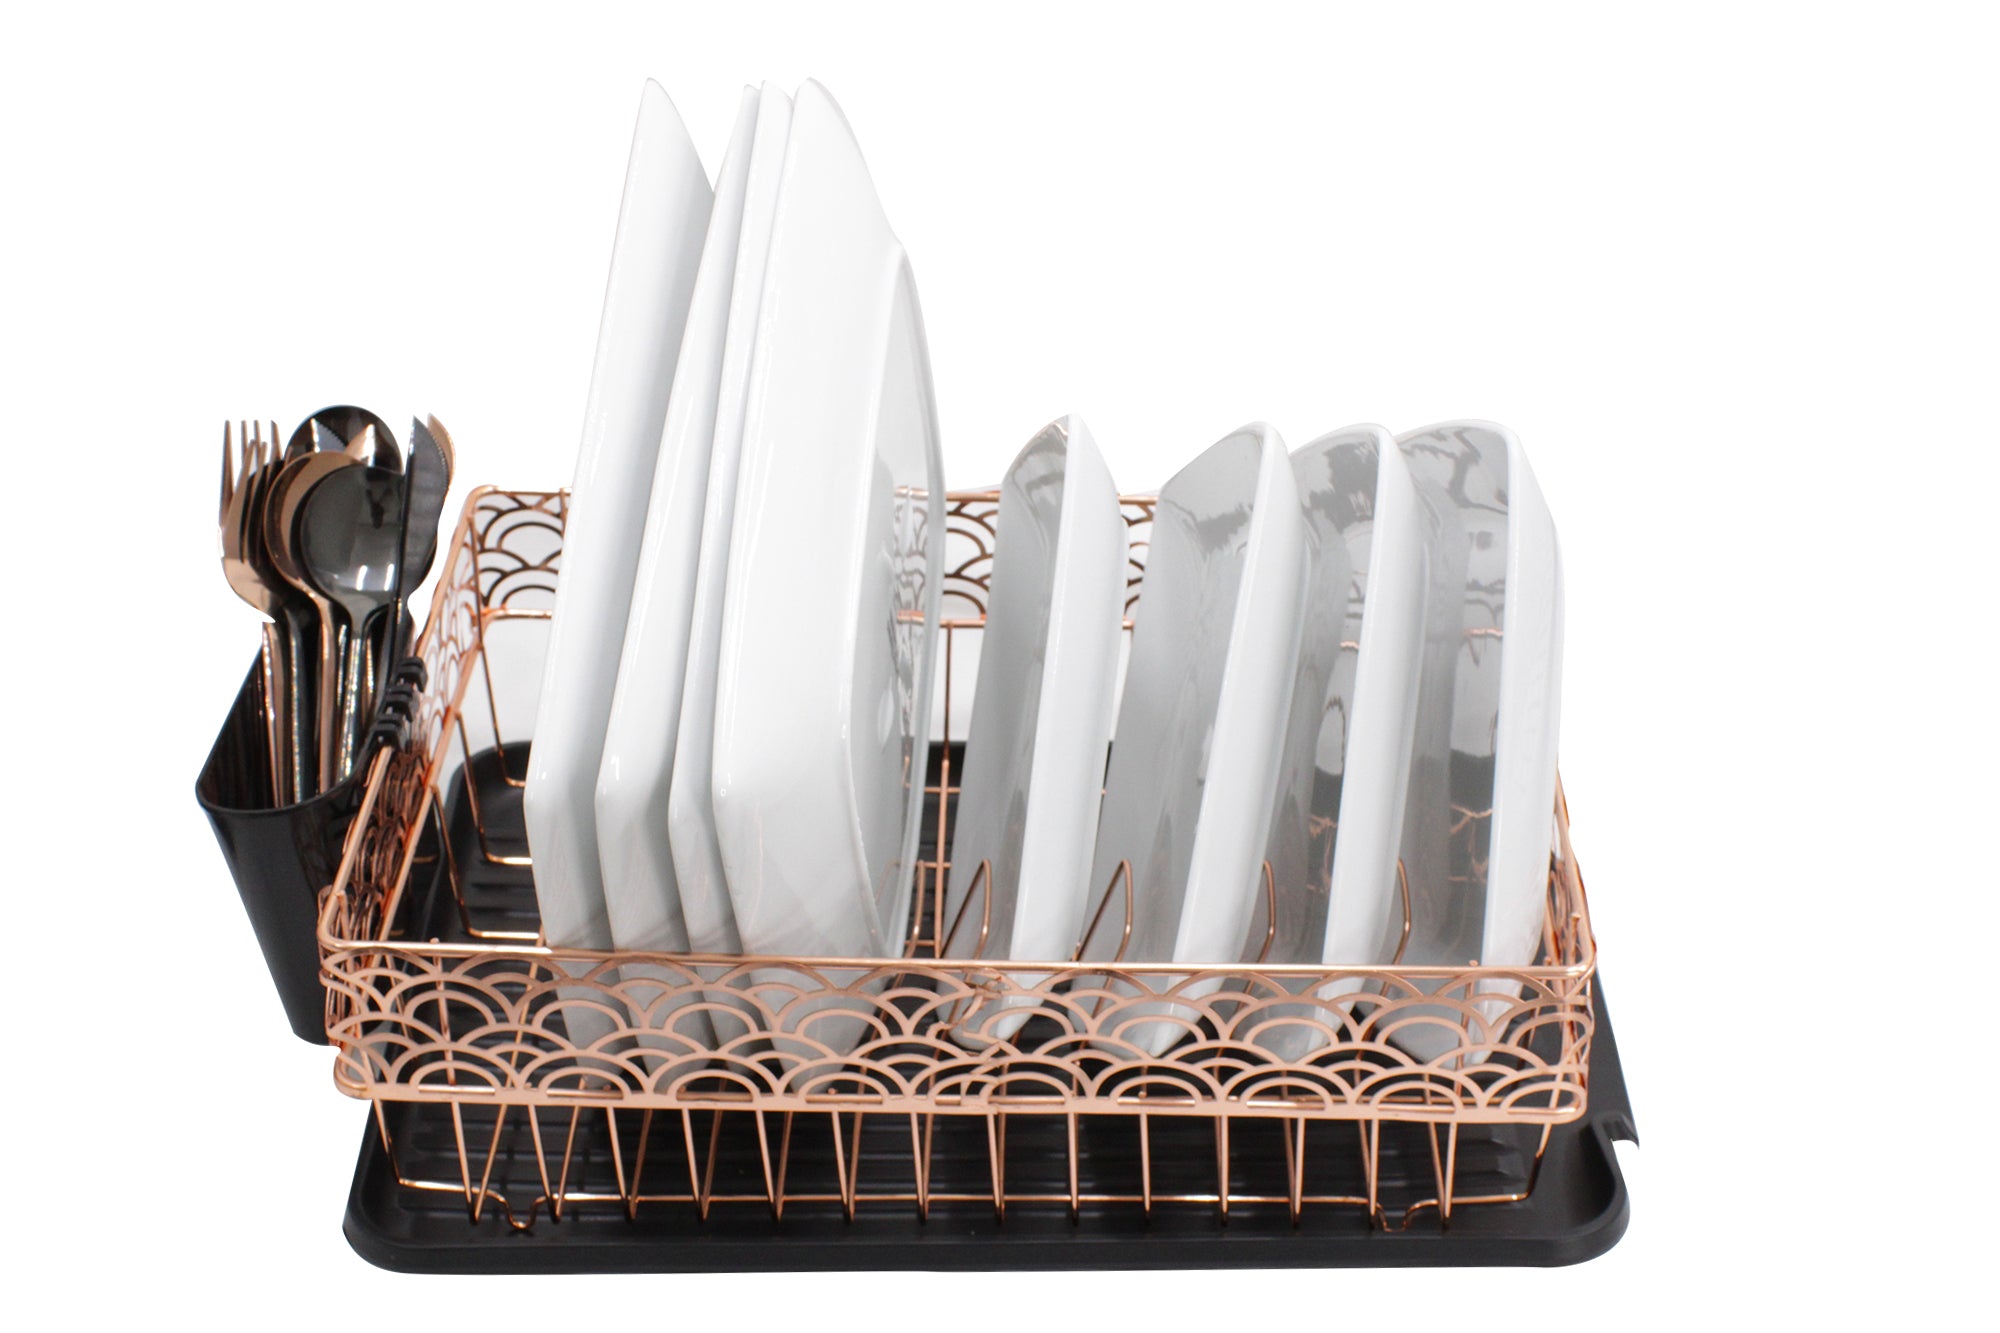 40cm x 30cm Arches Dish Draining with Cutlery Holder & Drip Tray 40 x 30 x10 cm Arches Dish Draining with Cutlery Holder & Drip Tray